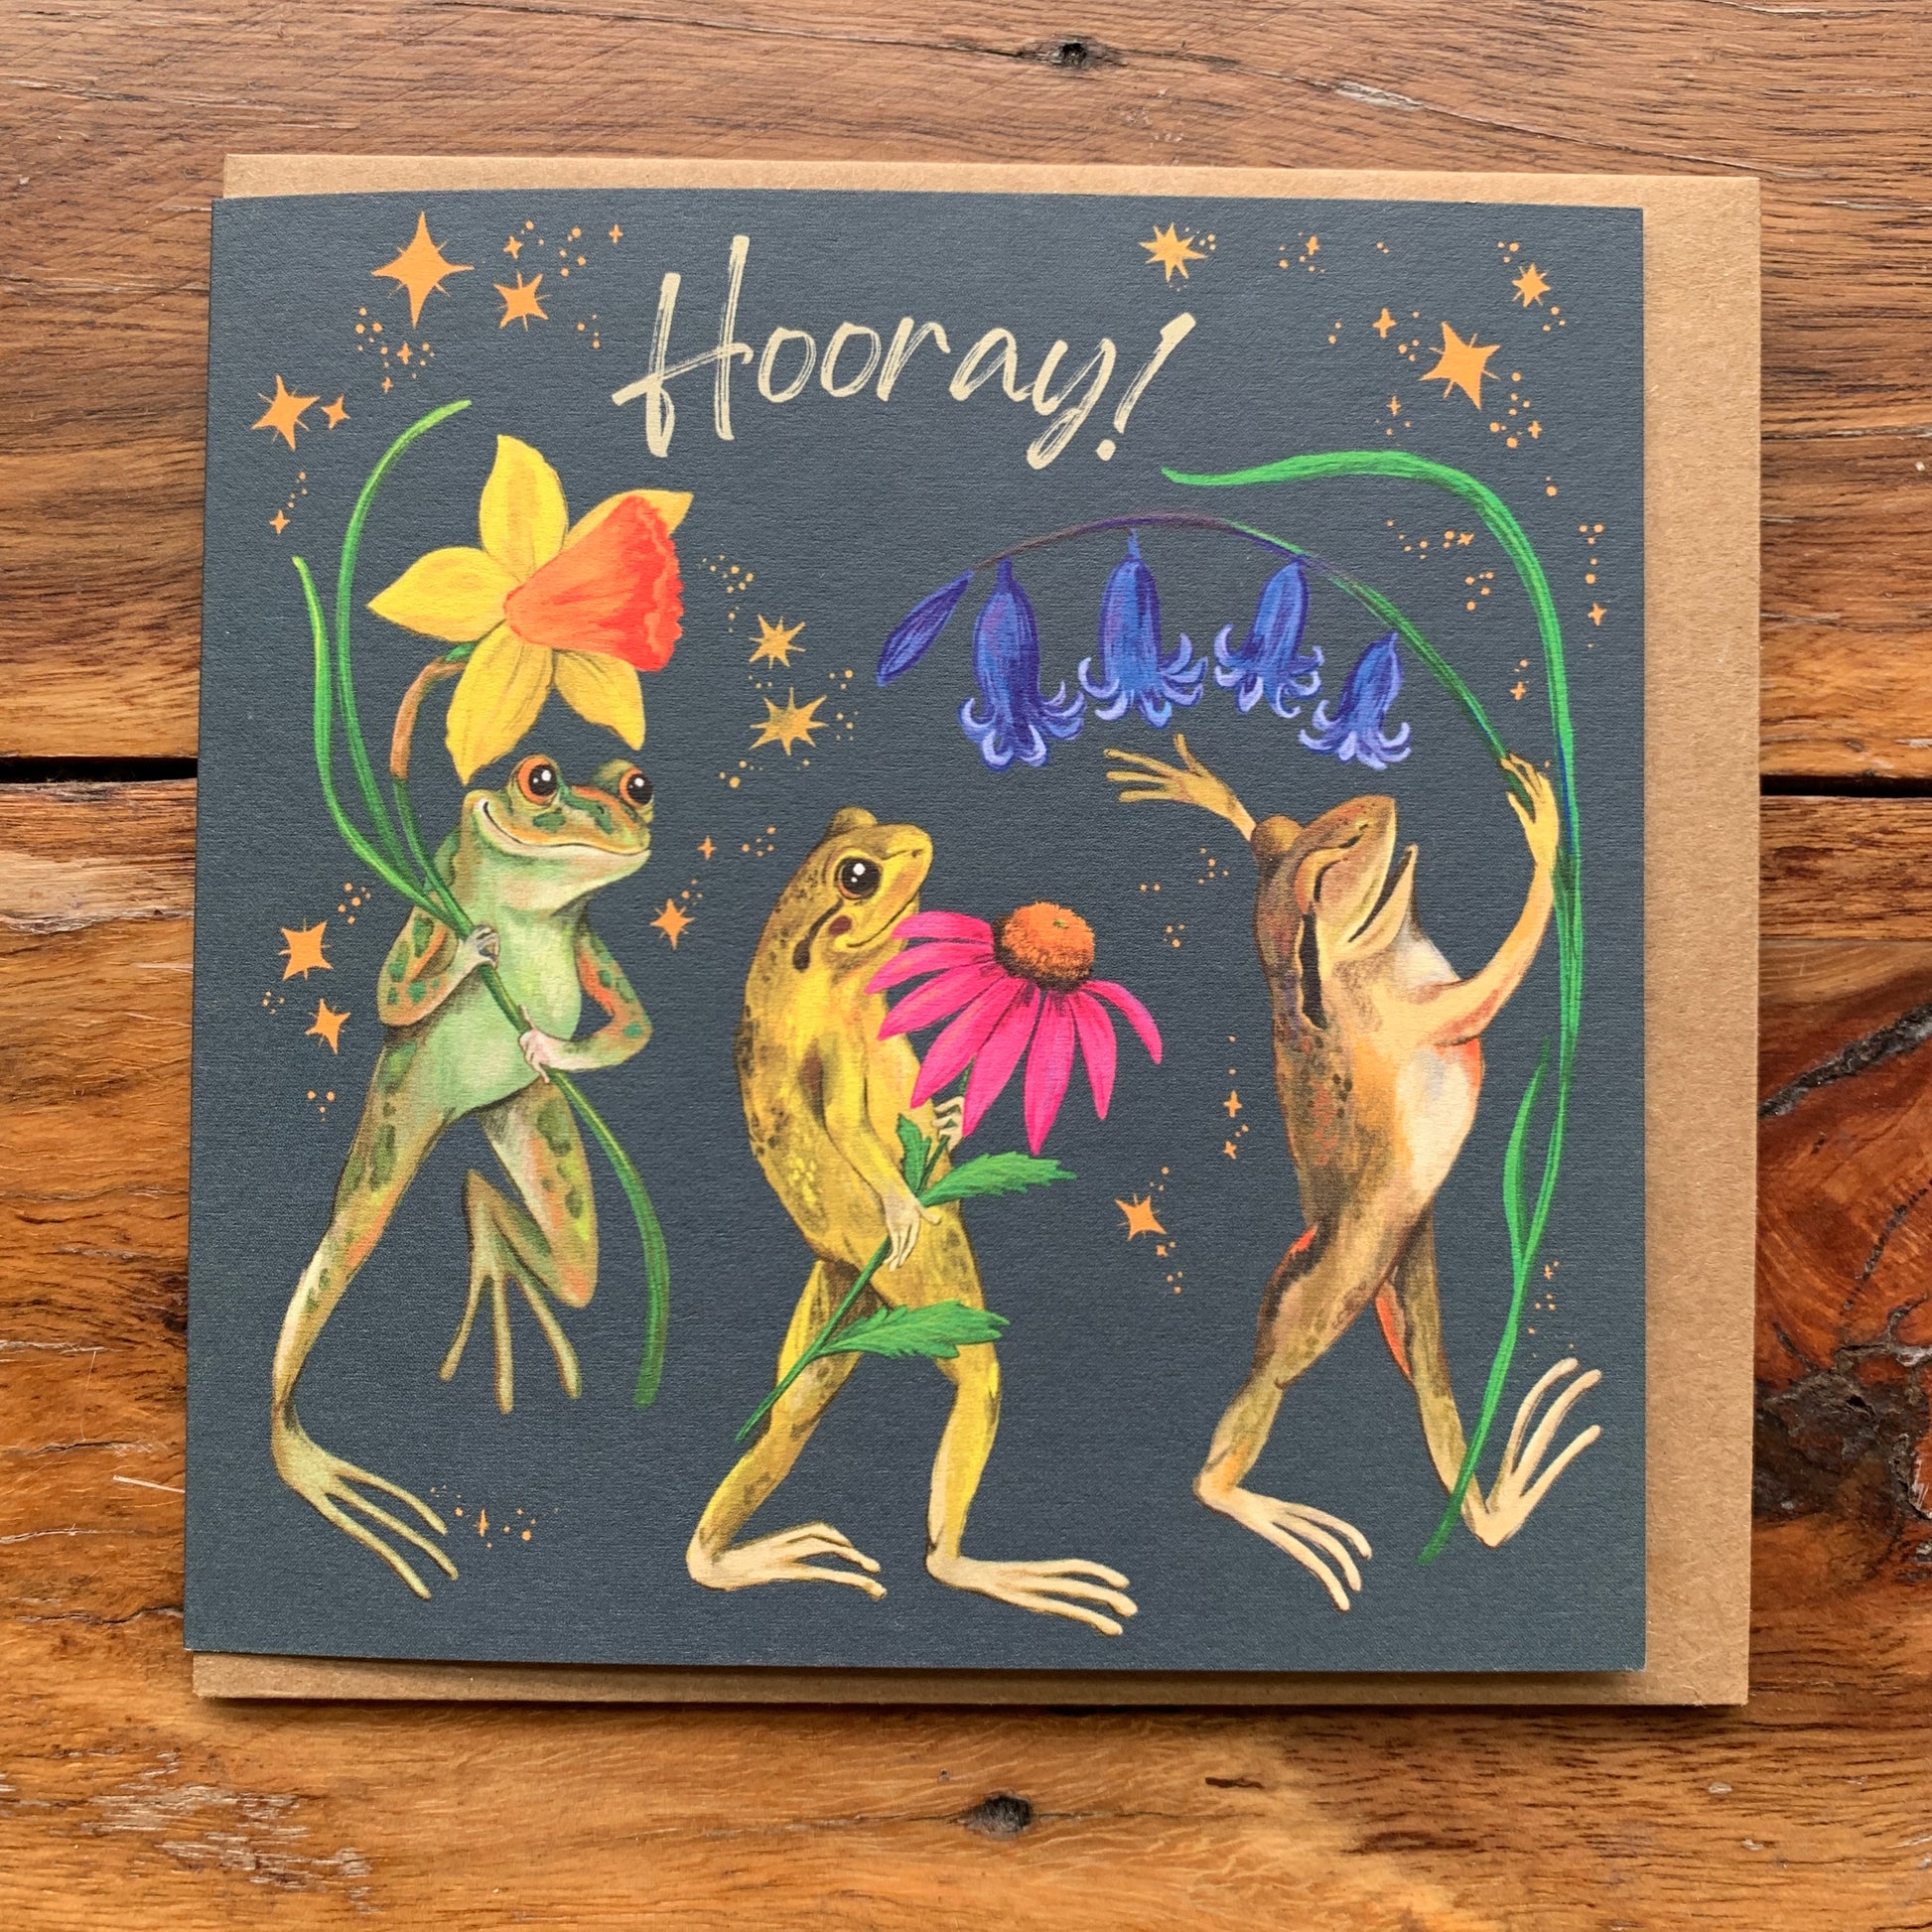 Anna Seed Art | Occasion Card - Hooray! Cute frog illustration